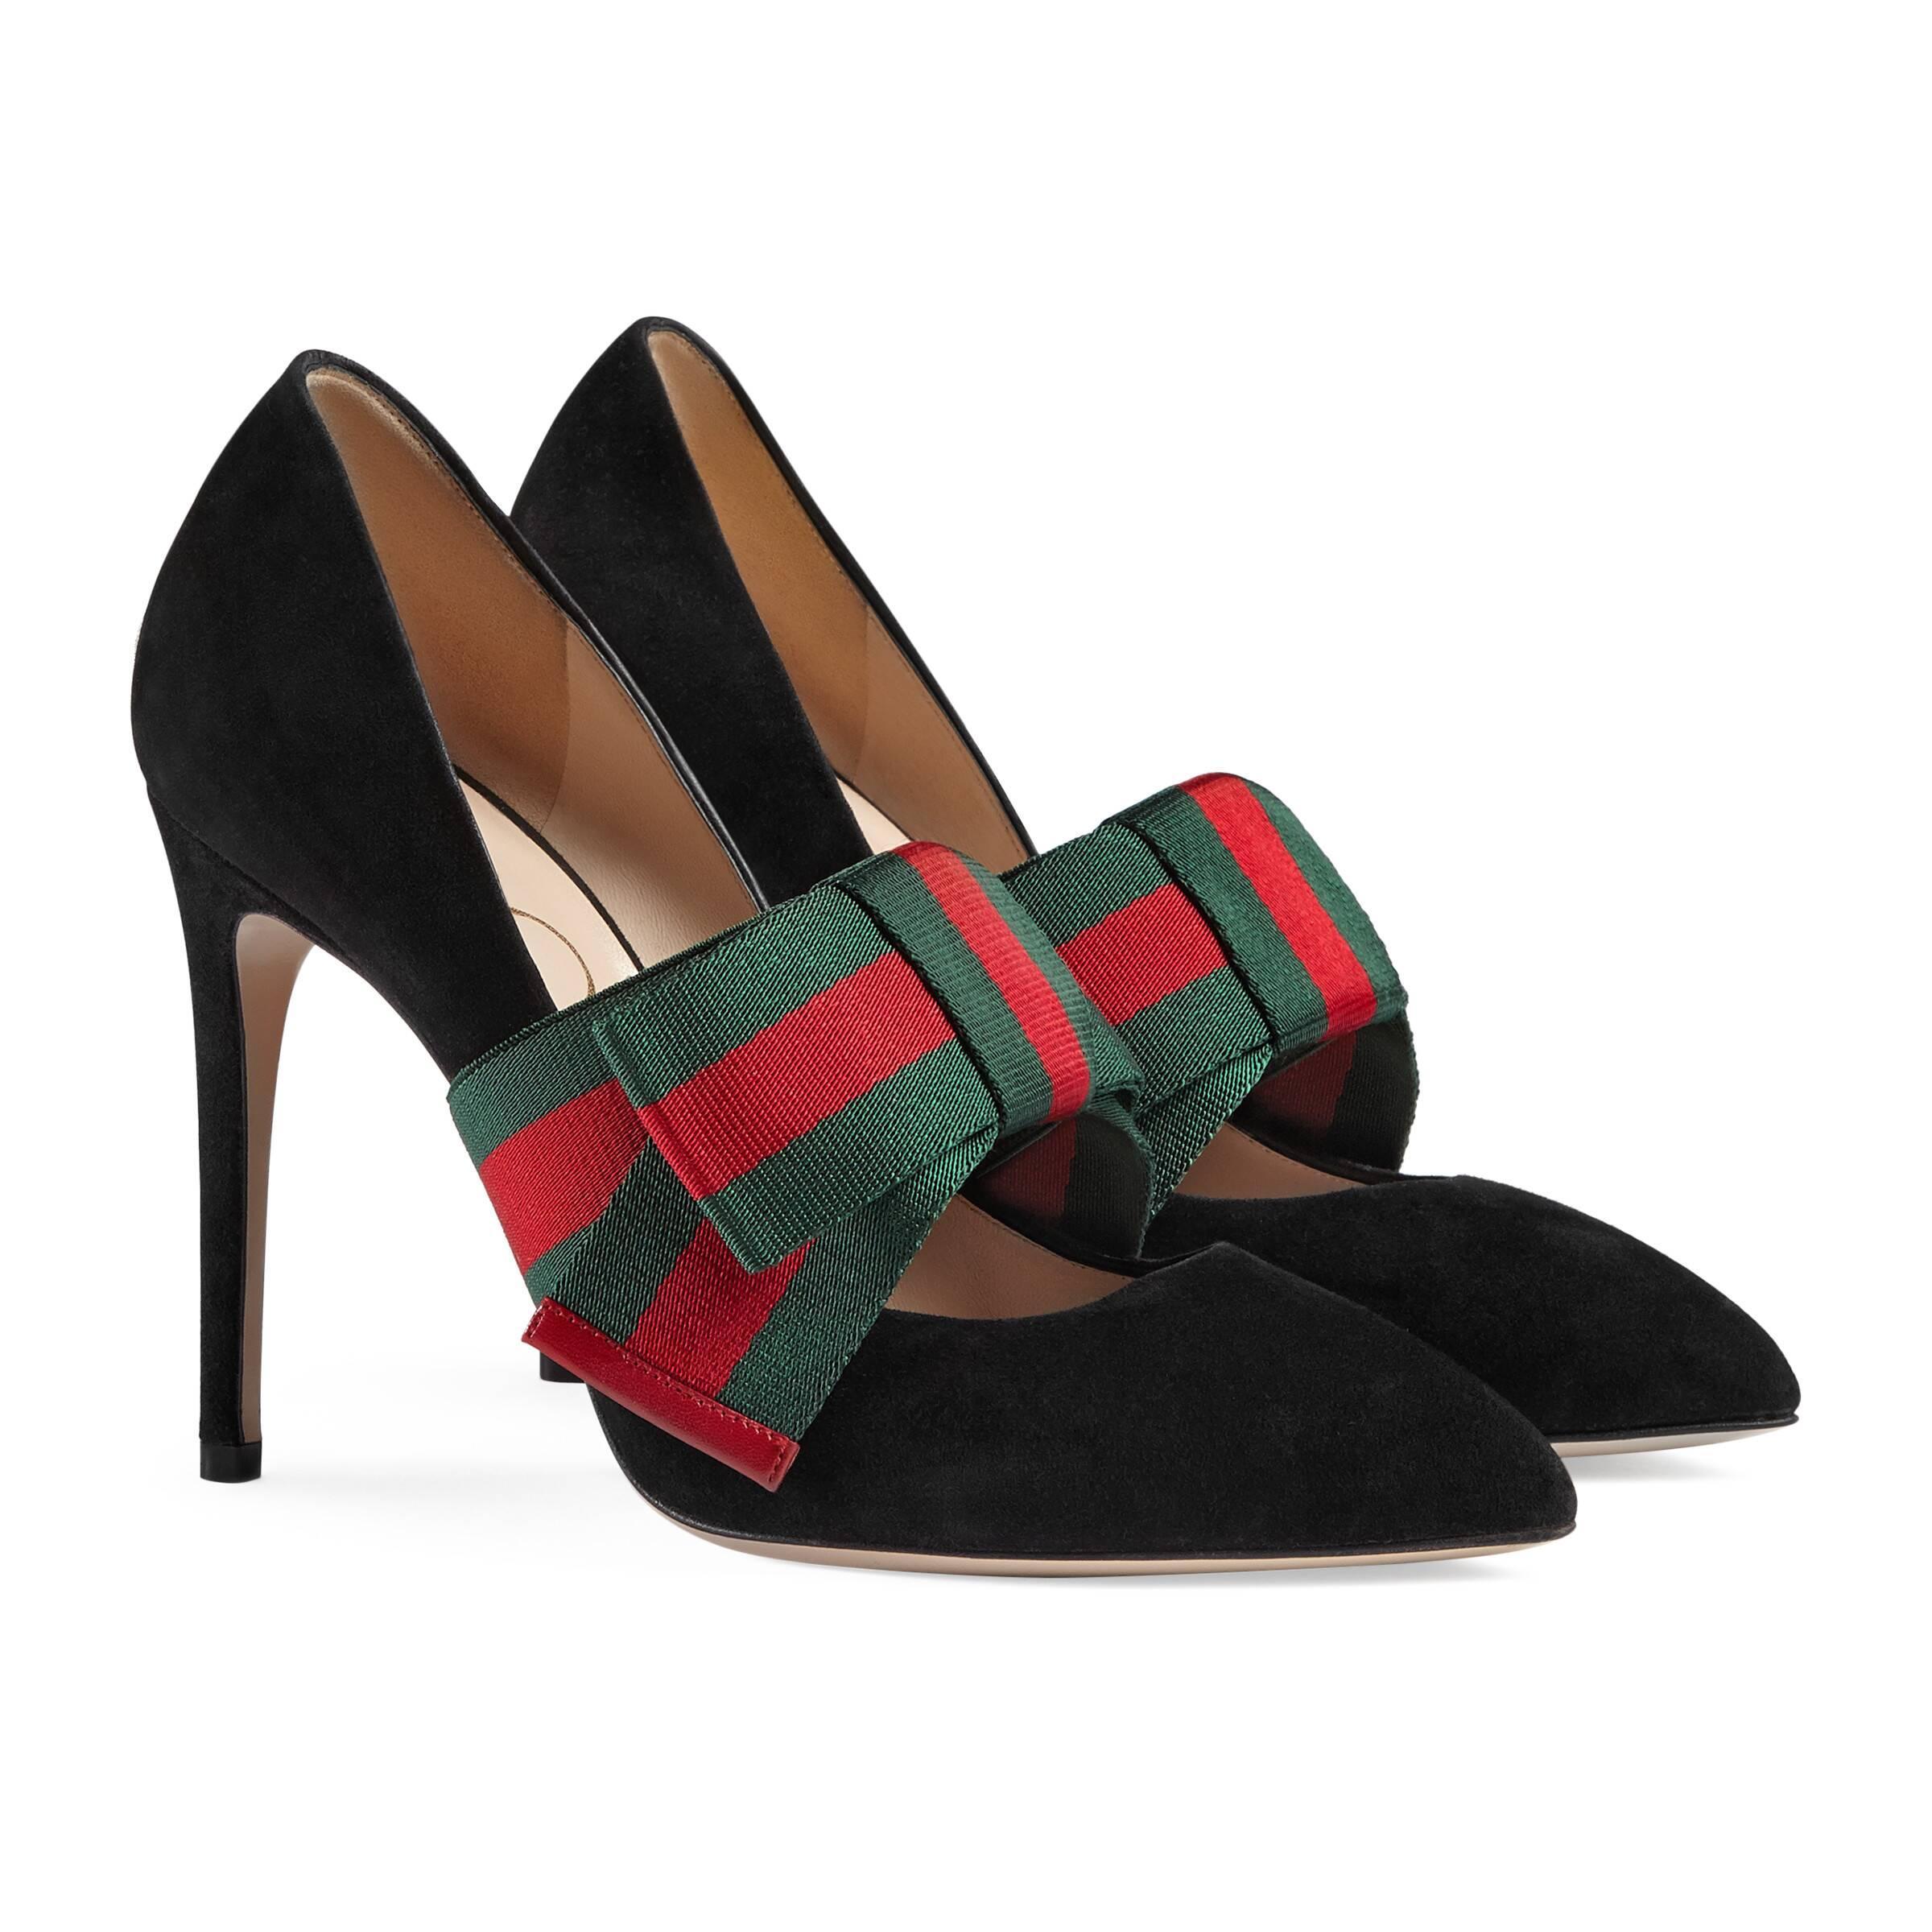 Gucci Suede Pump With Removable Web Bow in Black | Lyst